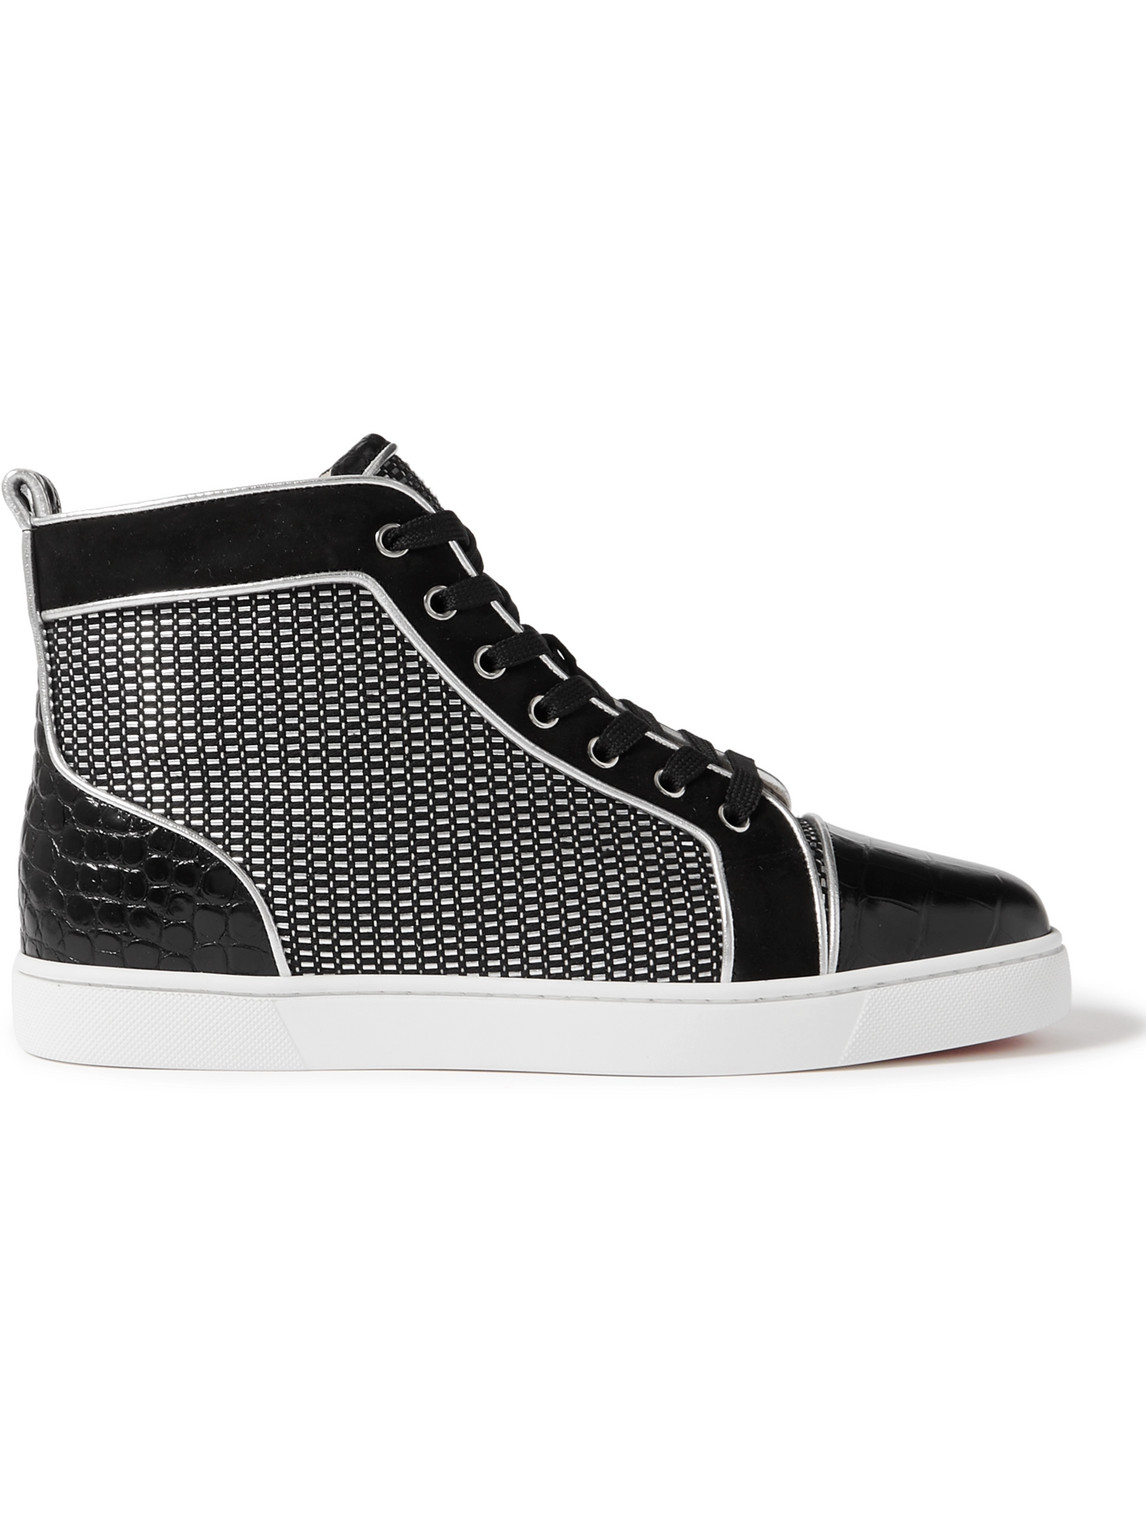 CHRISTIAN LOUBOUTIN LOUIS ORLATO SUEDE-TRIMMED CROC-EFFECT AND WOVEN LEATHER SNEAKERS